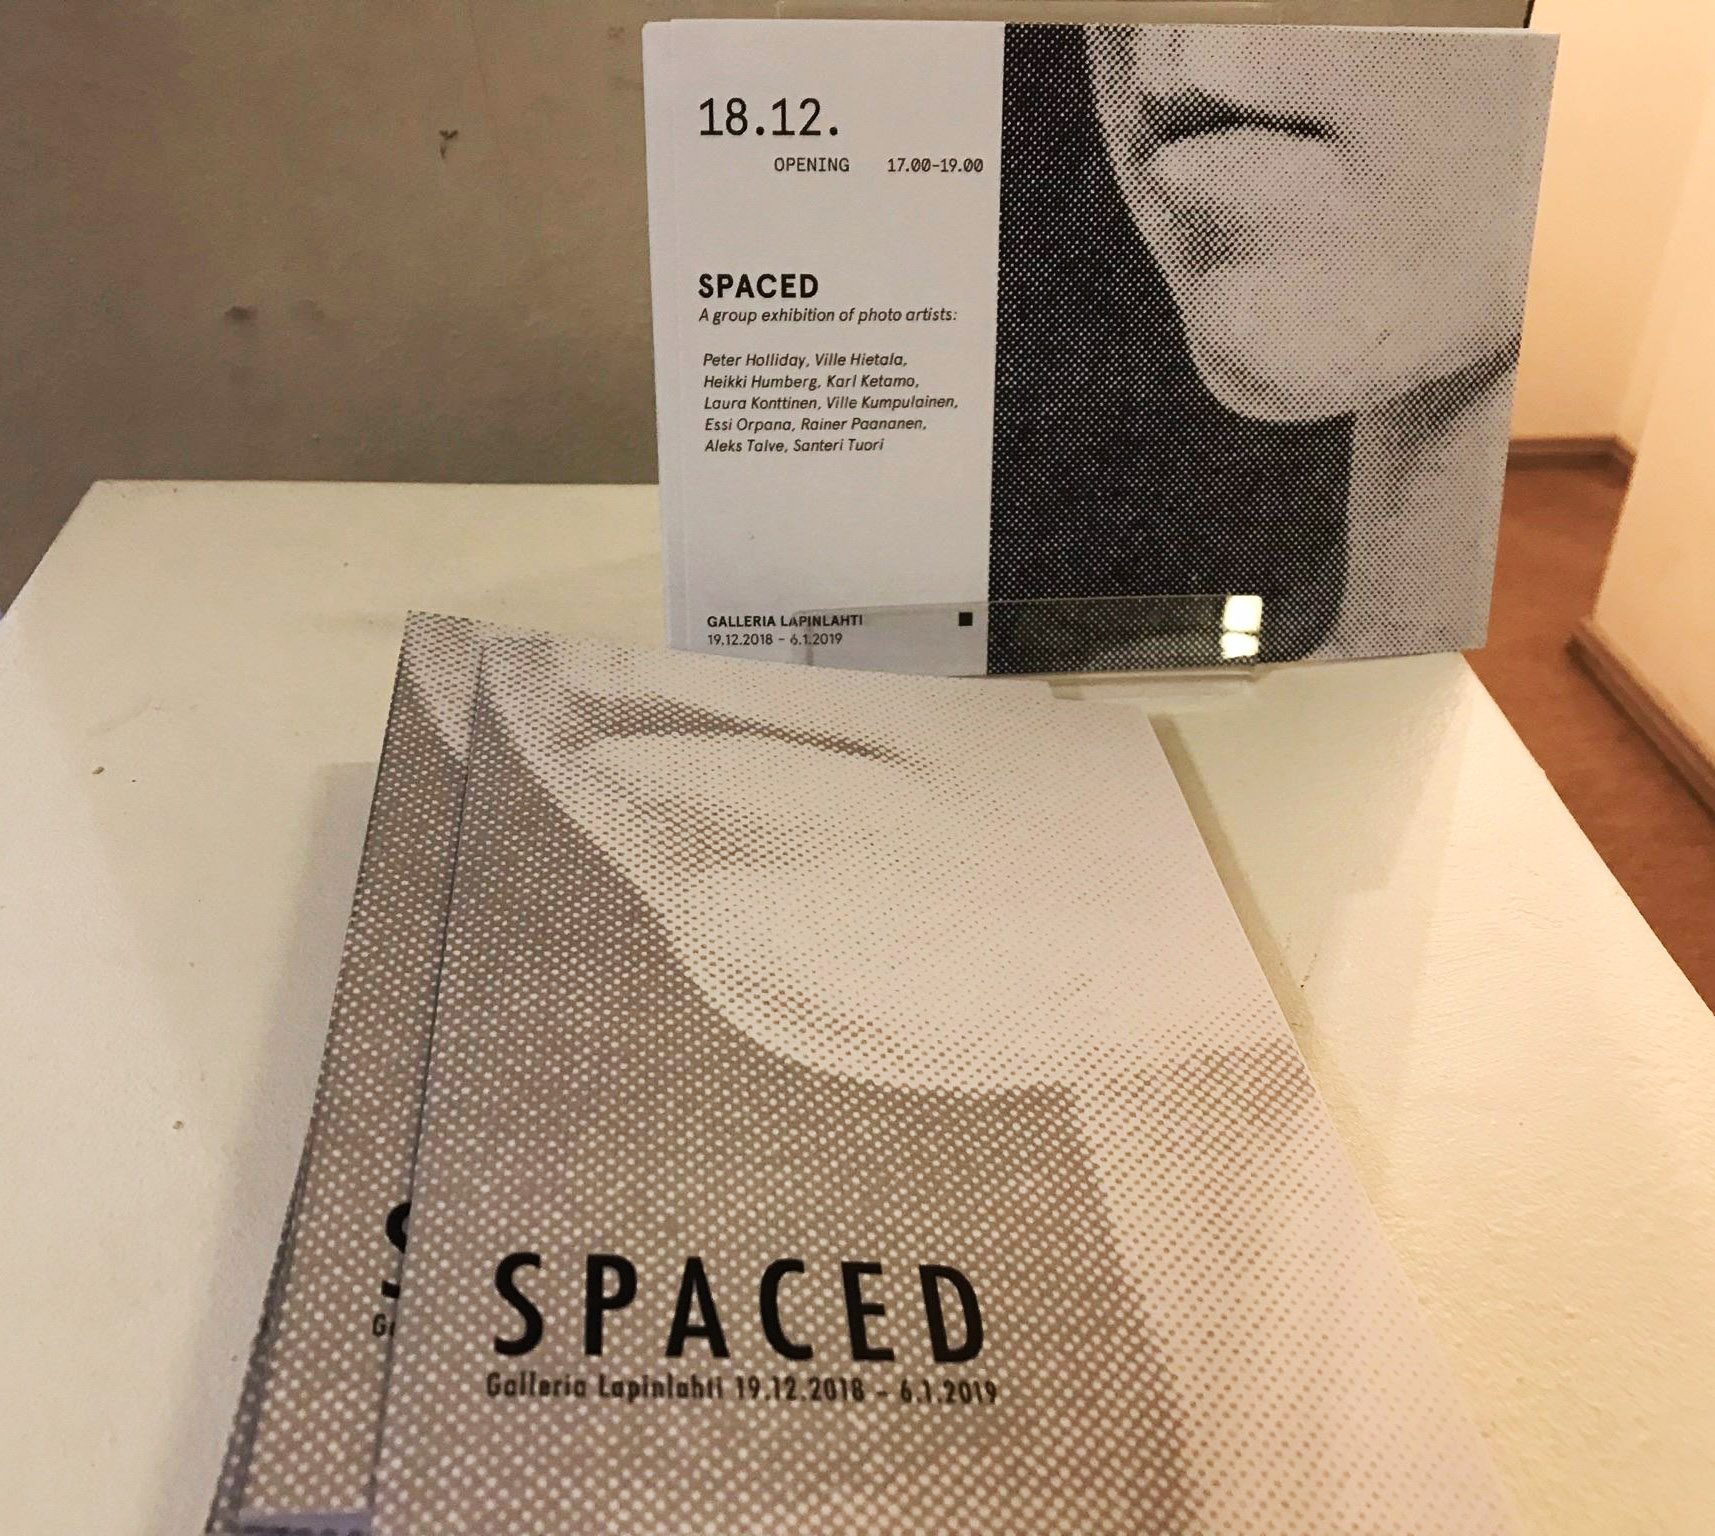 SPACED: a group show of photography students at Galleria Lapinlahti